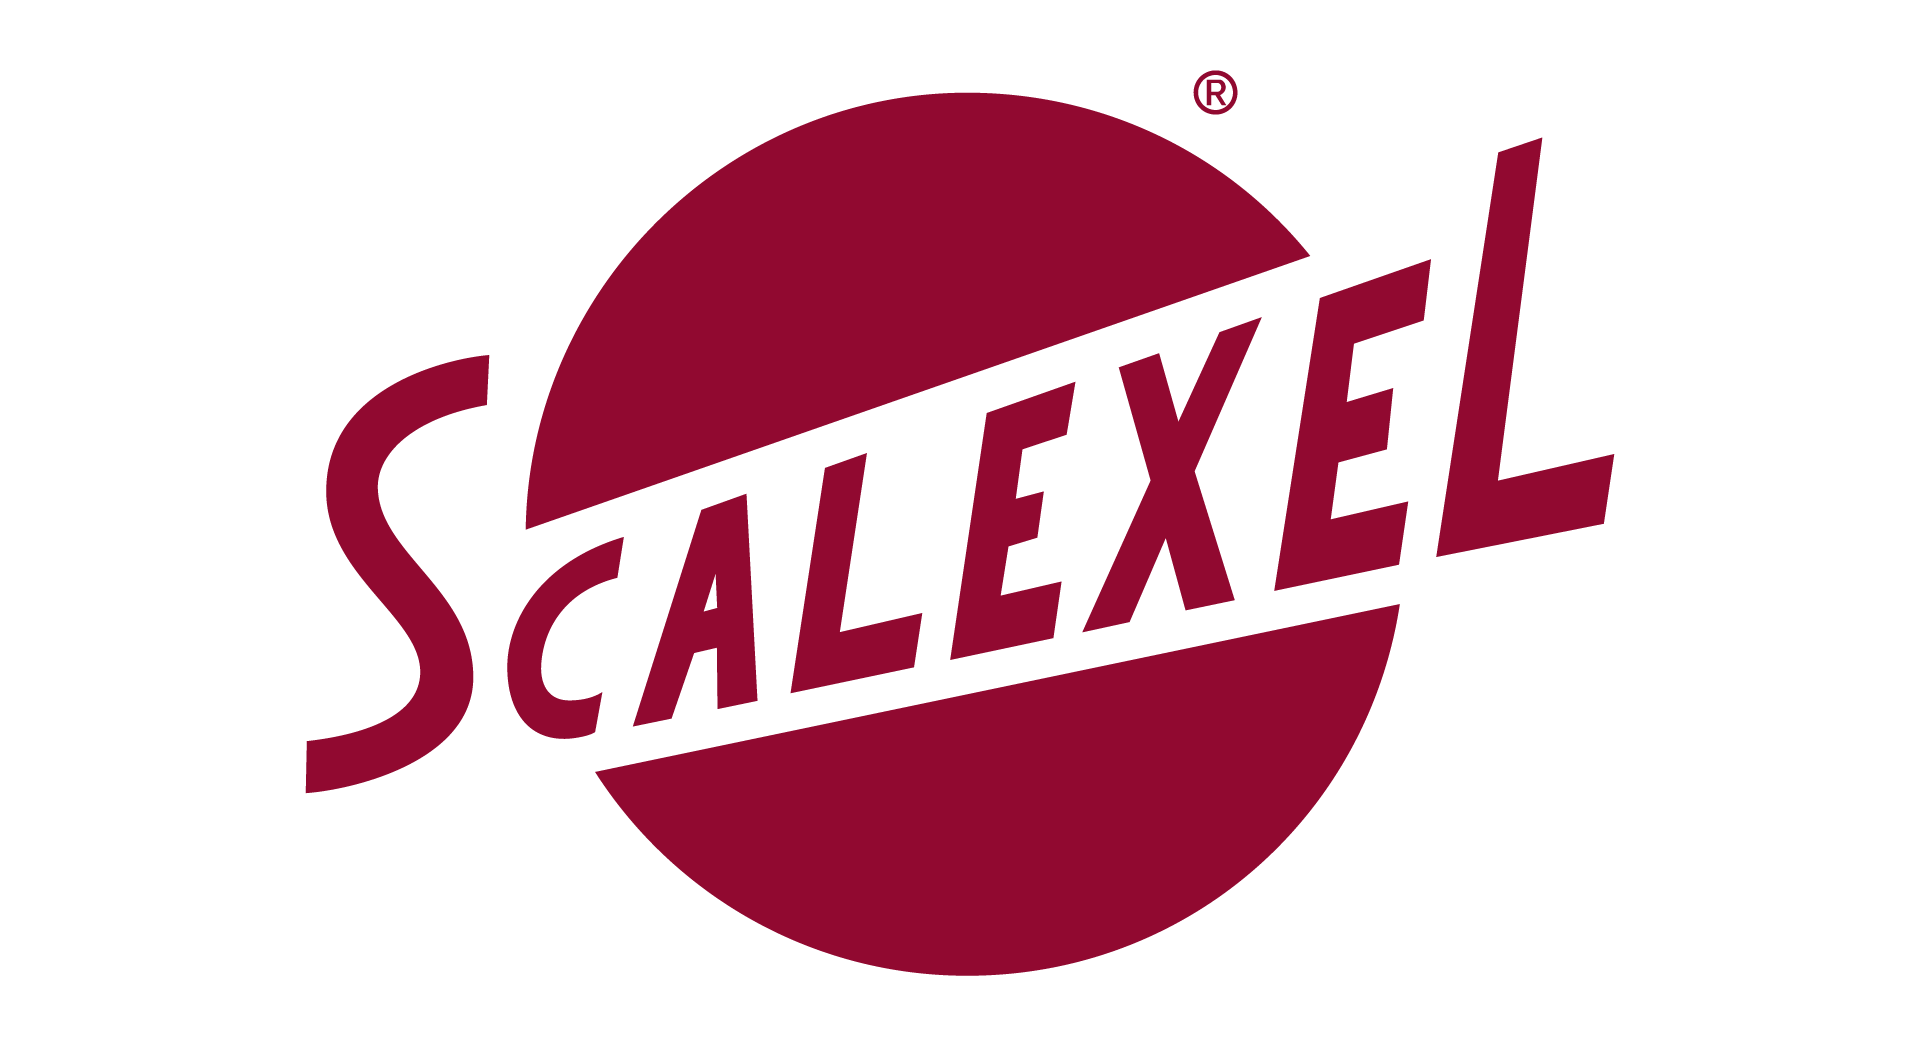 Logo of SCALEXEL - the research product category for transforming performance through operations